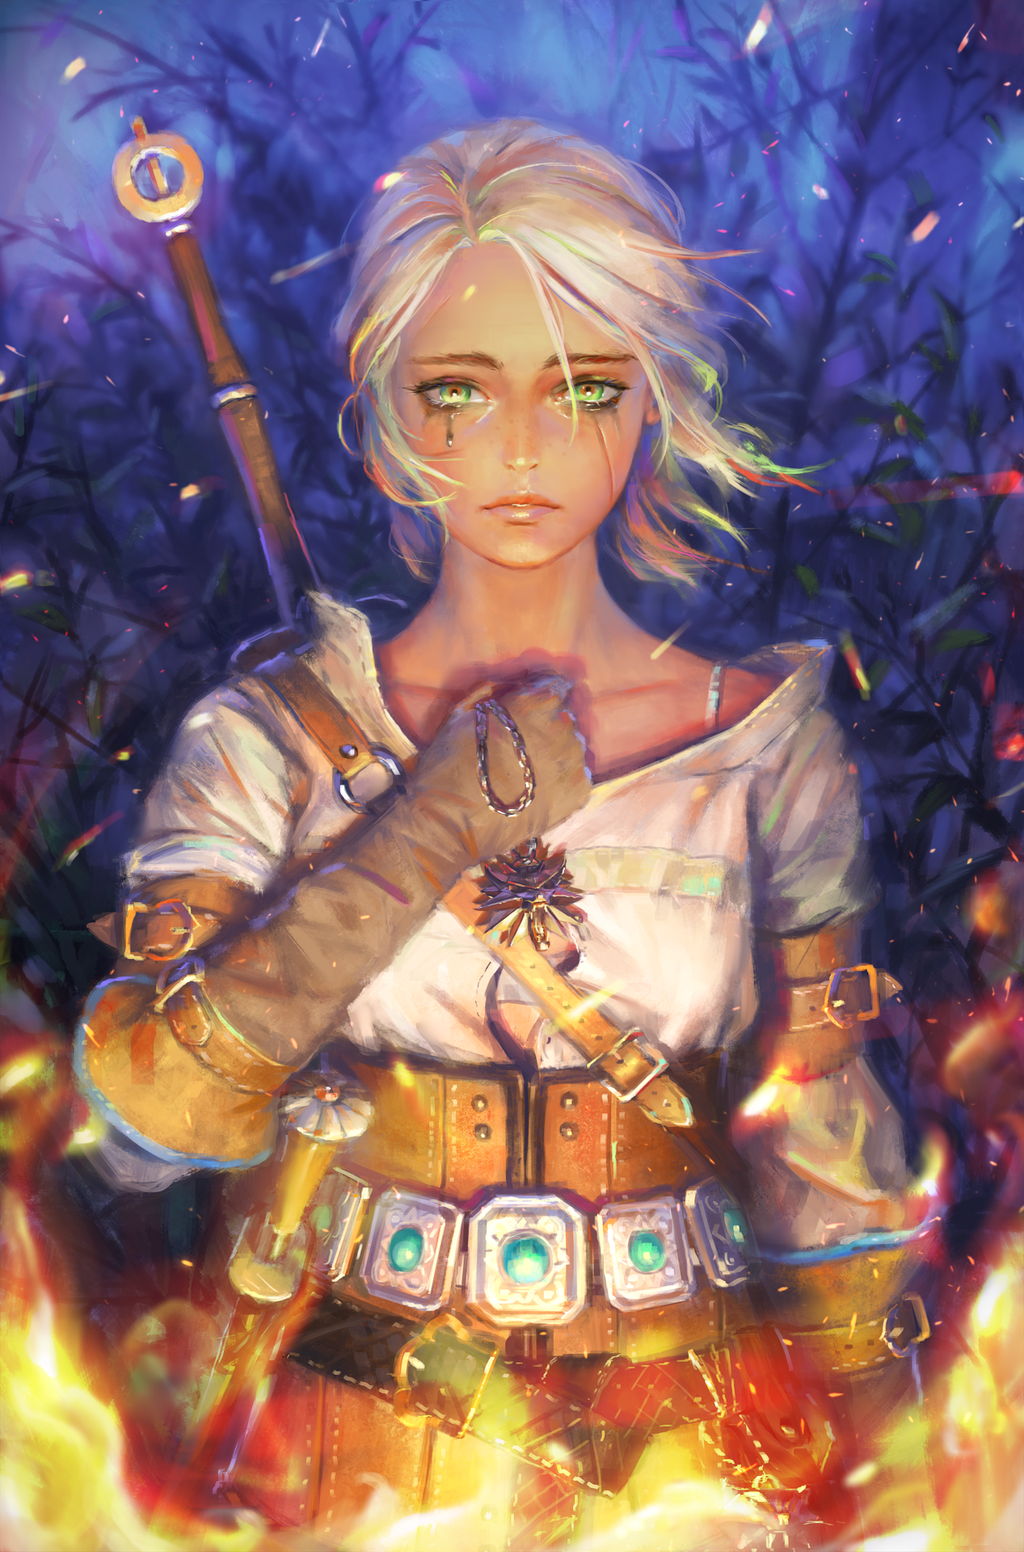 General 1024x1552 The Witcher 3: Wild Hunt Cirilla Fiona Elen Riannon video games fantasy girl video game characters video game girls video game art fantasy art sad tears fire green eyes PC gaming RPG